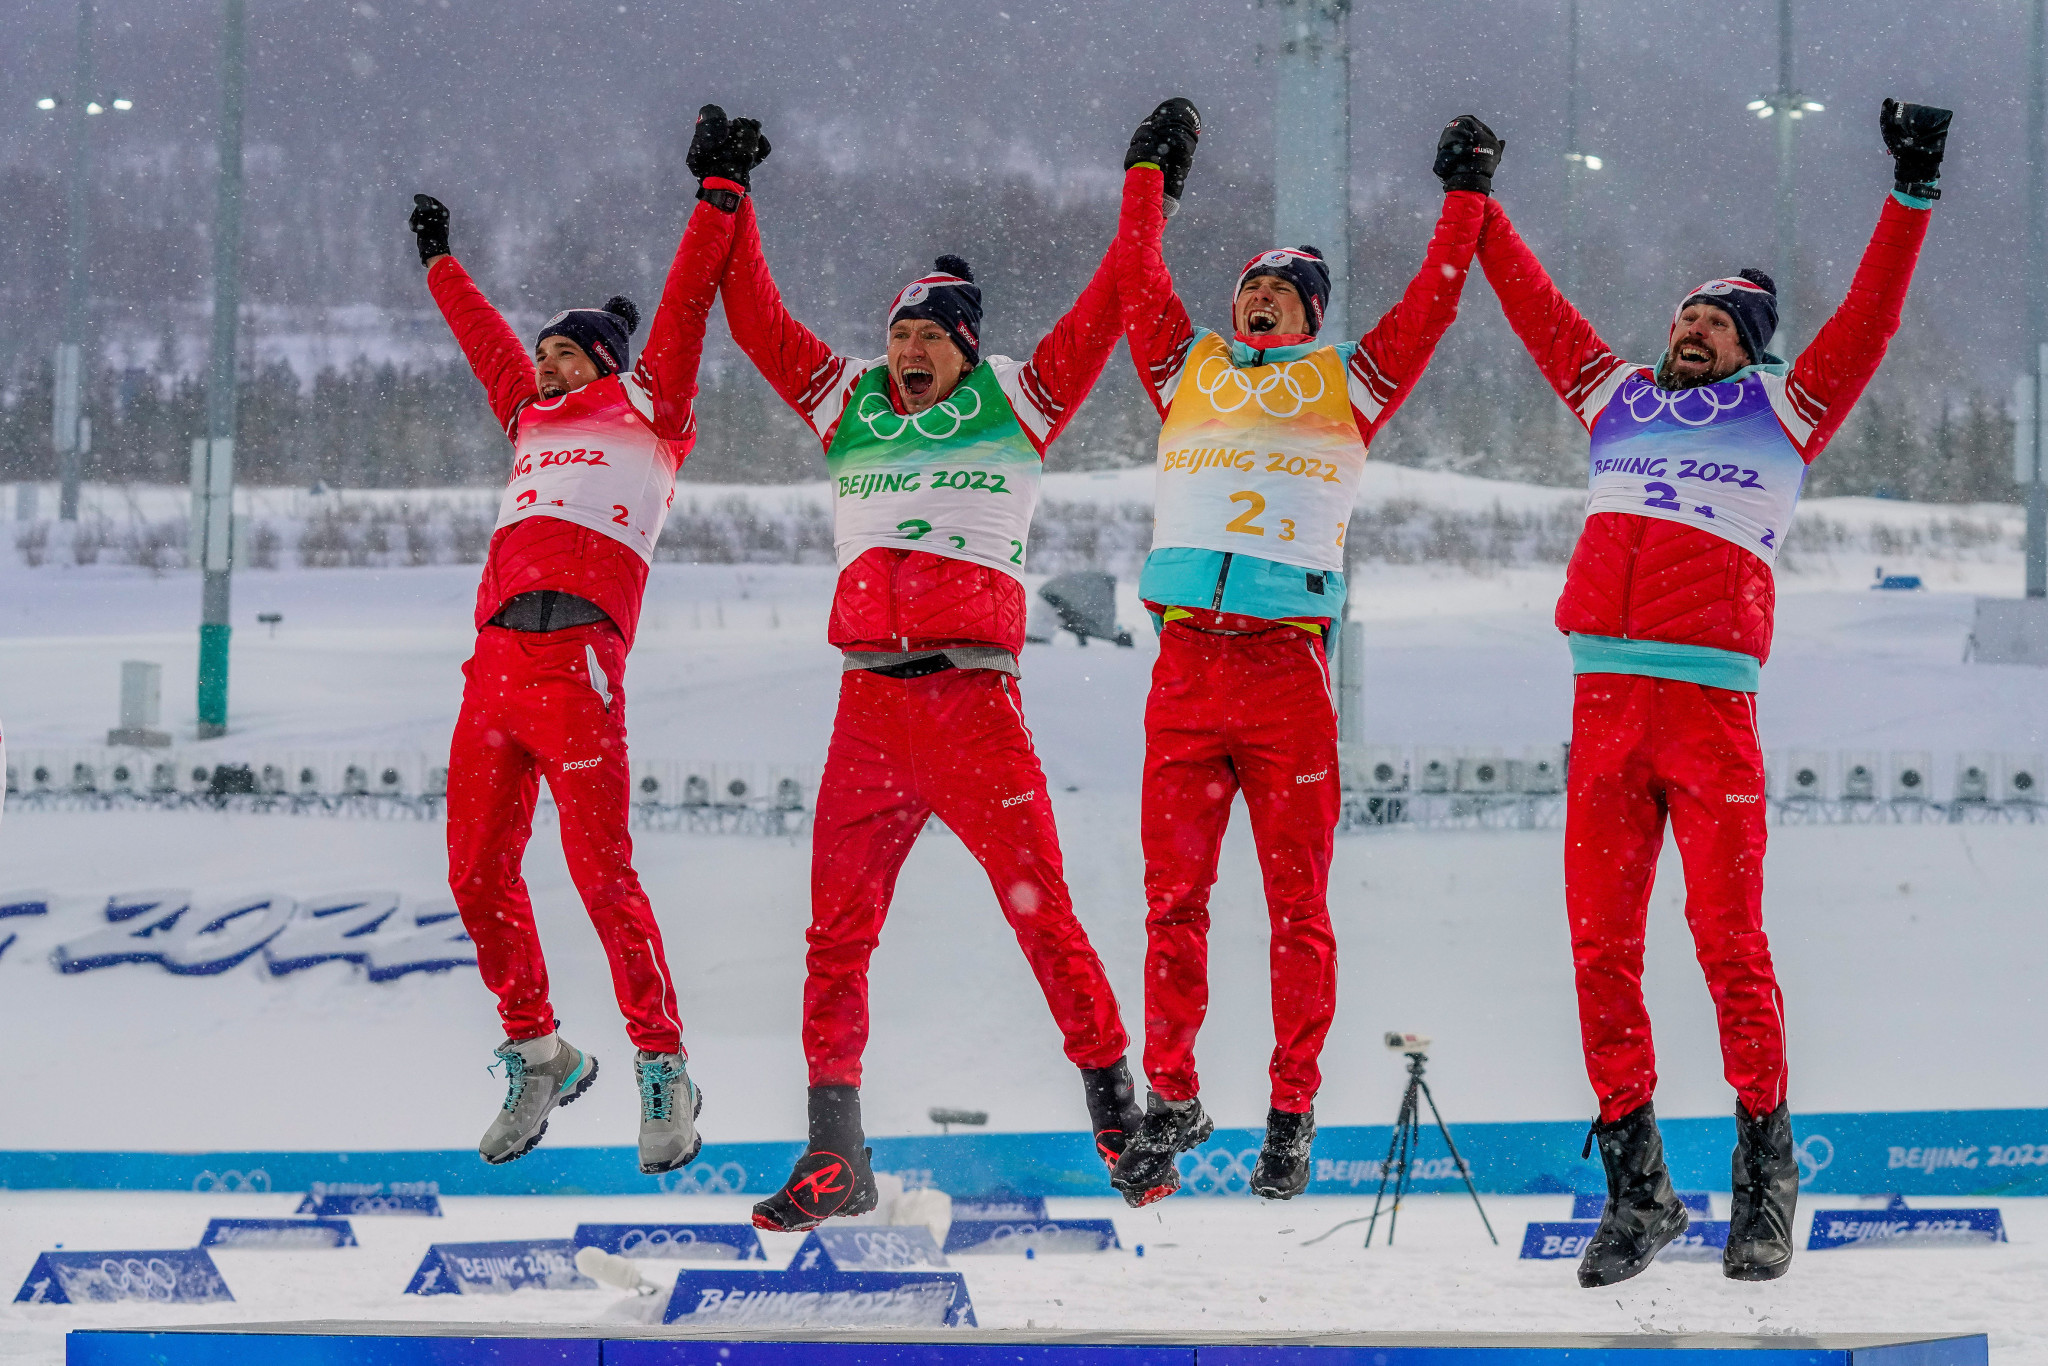 The ROC triumphed in the men's 4x10km cross-country skiing relay event ©Getty Images